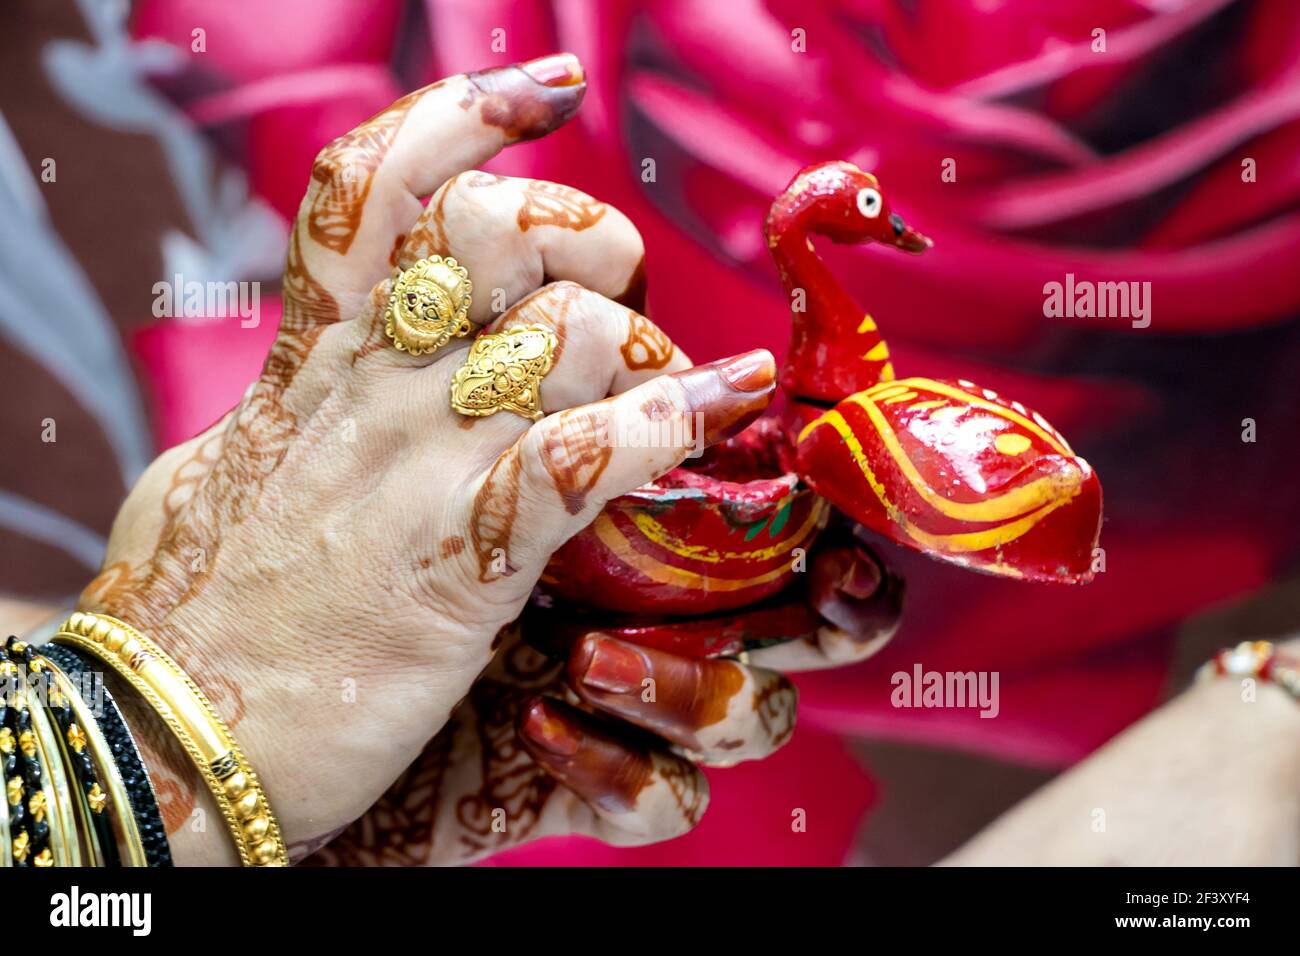 To apply tilak, a woman is taking a kumkum in her finger in india Stock Photo